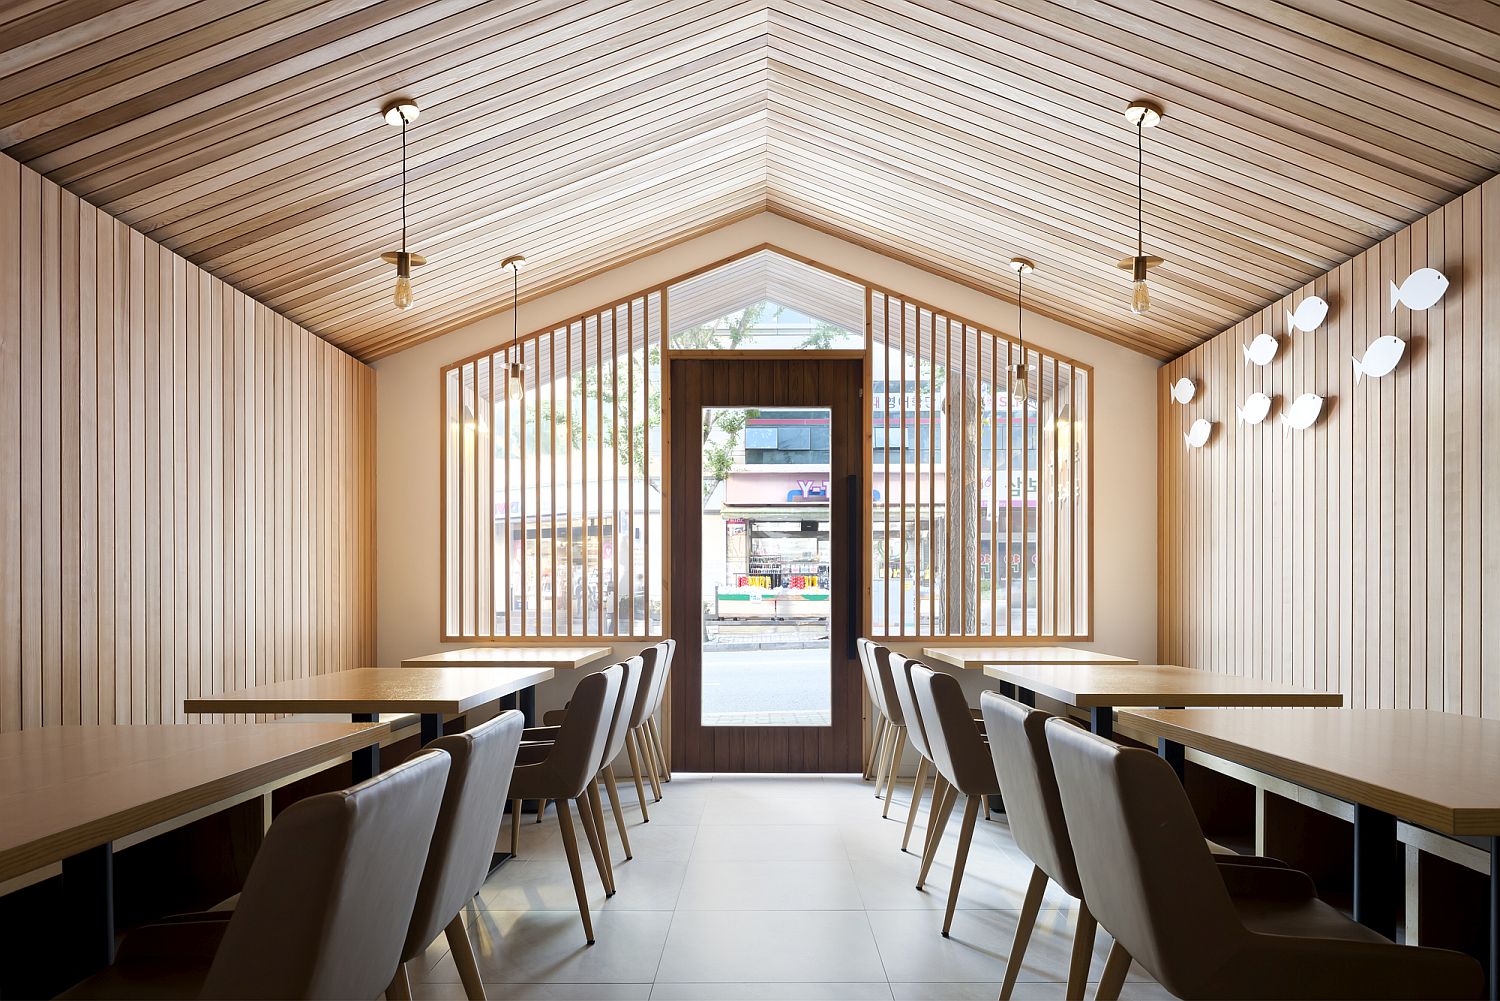 Gable-roof-and-red-cedar-create-a-light-filled-ambiance-inside-the-small-restaurant